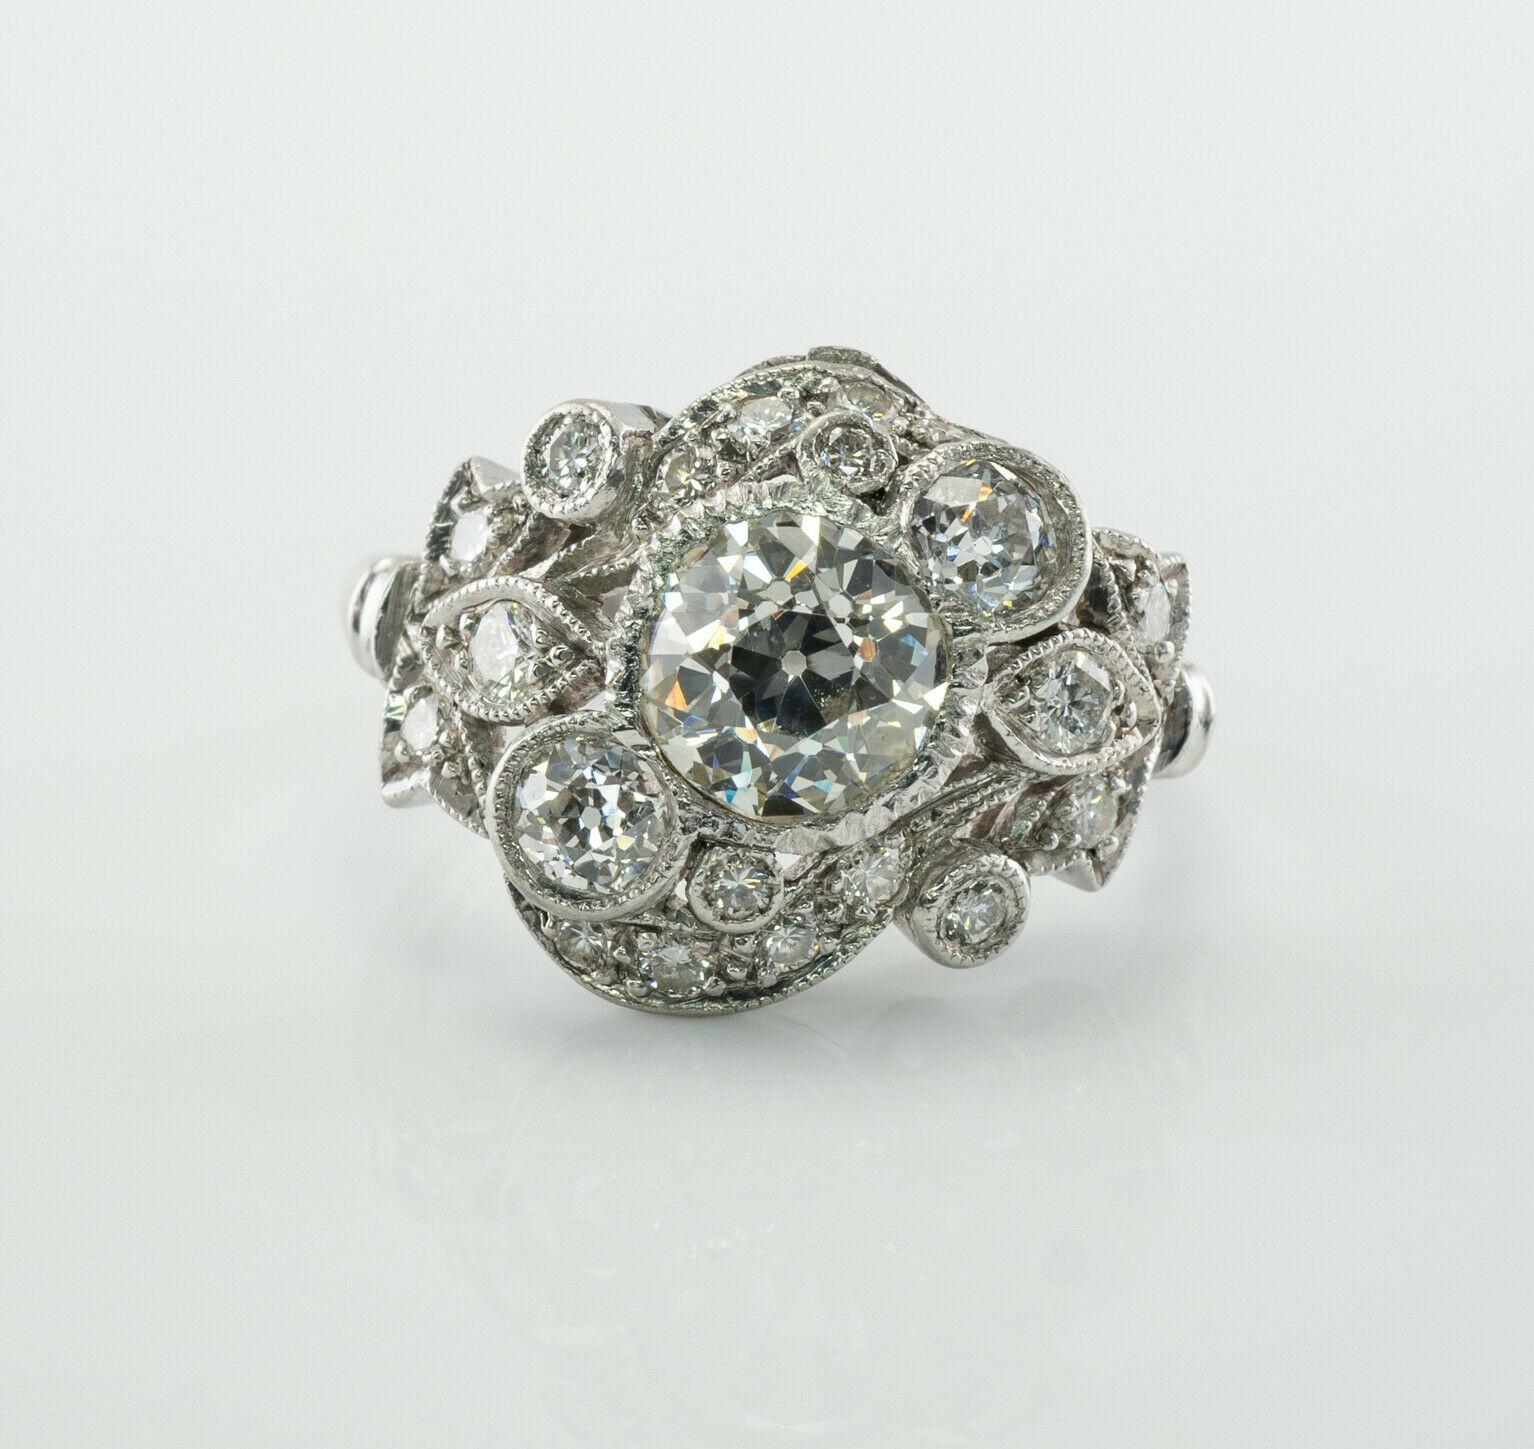 This vintage circa 1930s ring is finely crafted in luxurious Platinum and set with genuine Diamonds. The center Old Mine cut Diamond is 1.20 carat of VS2 clarity and J color. Two smaller bezel-set old mine cut total .40 carat. And more round cut